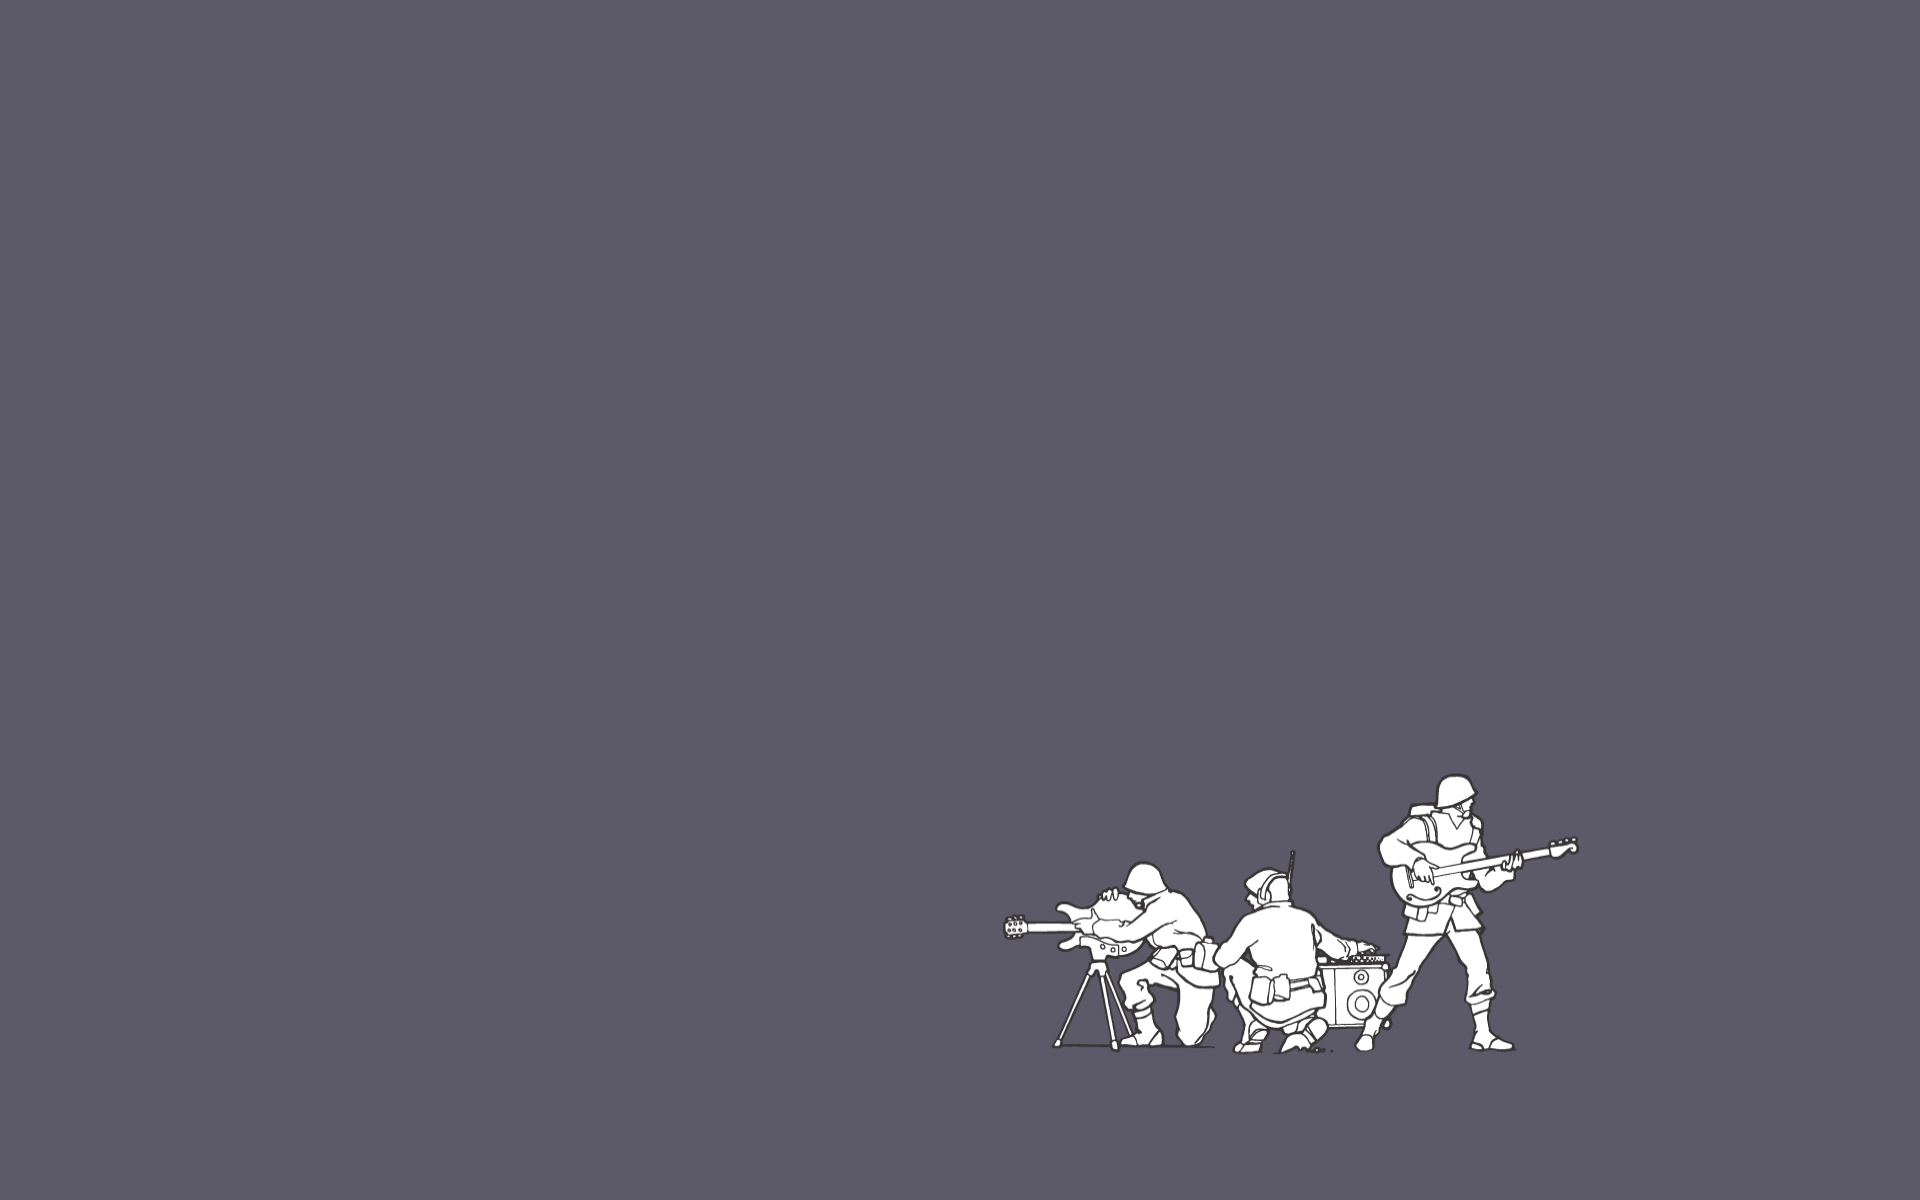 A few simple, yet funny and cool wallpaper